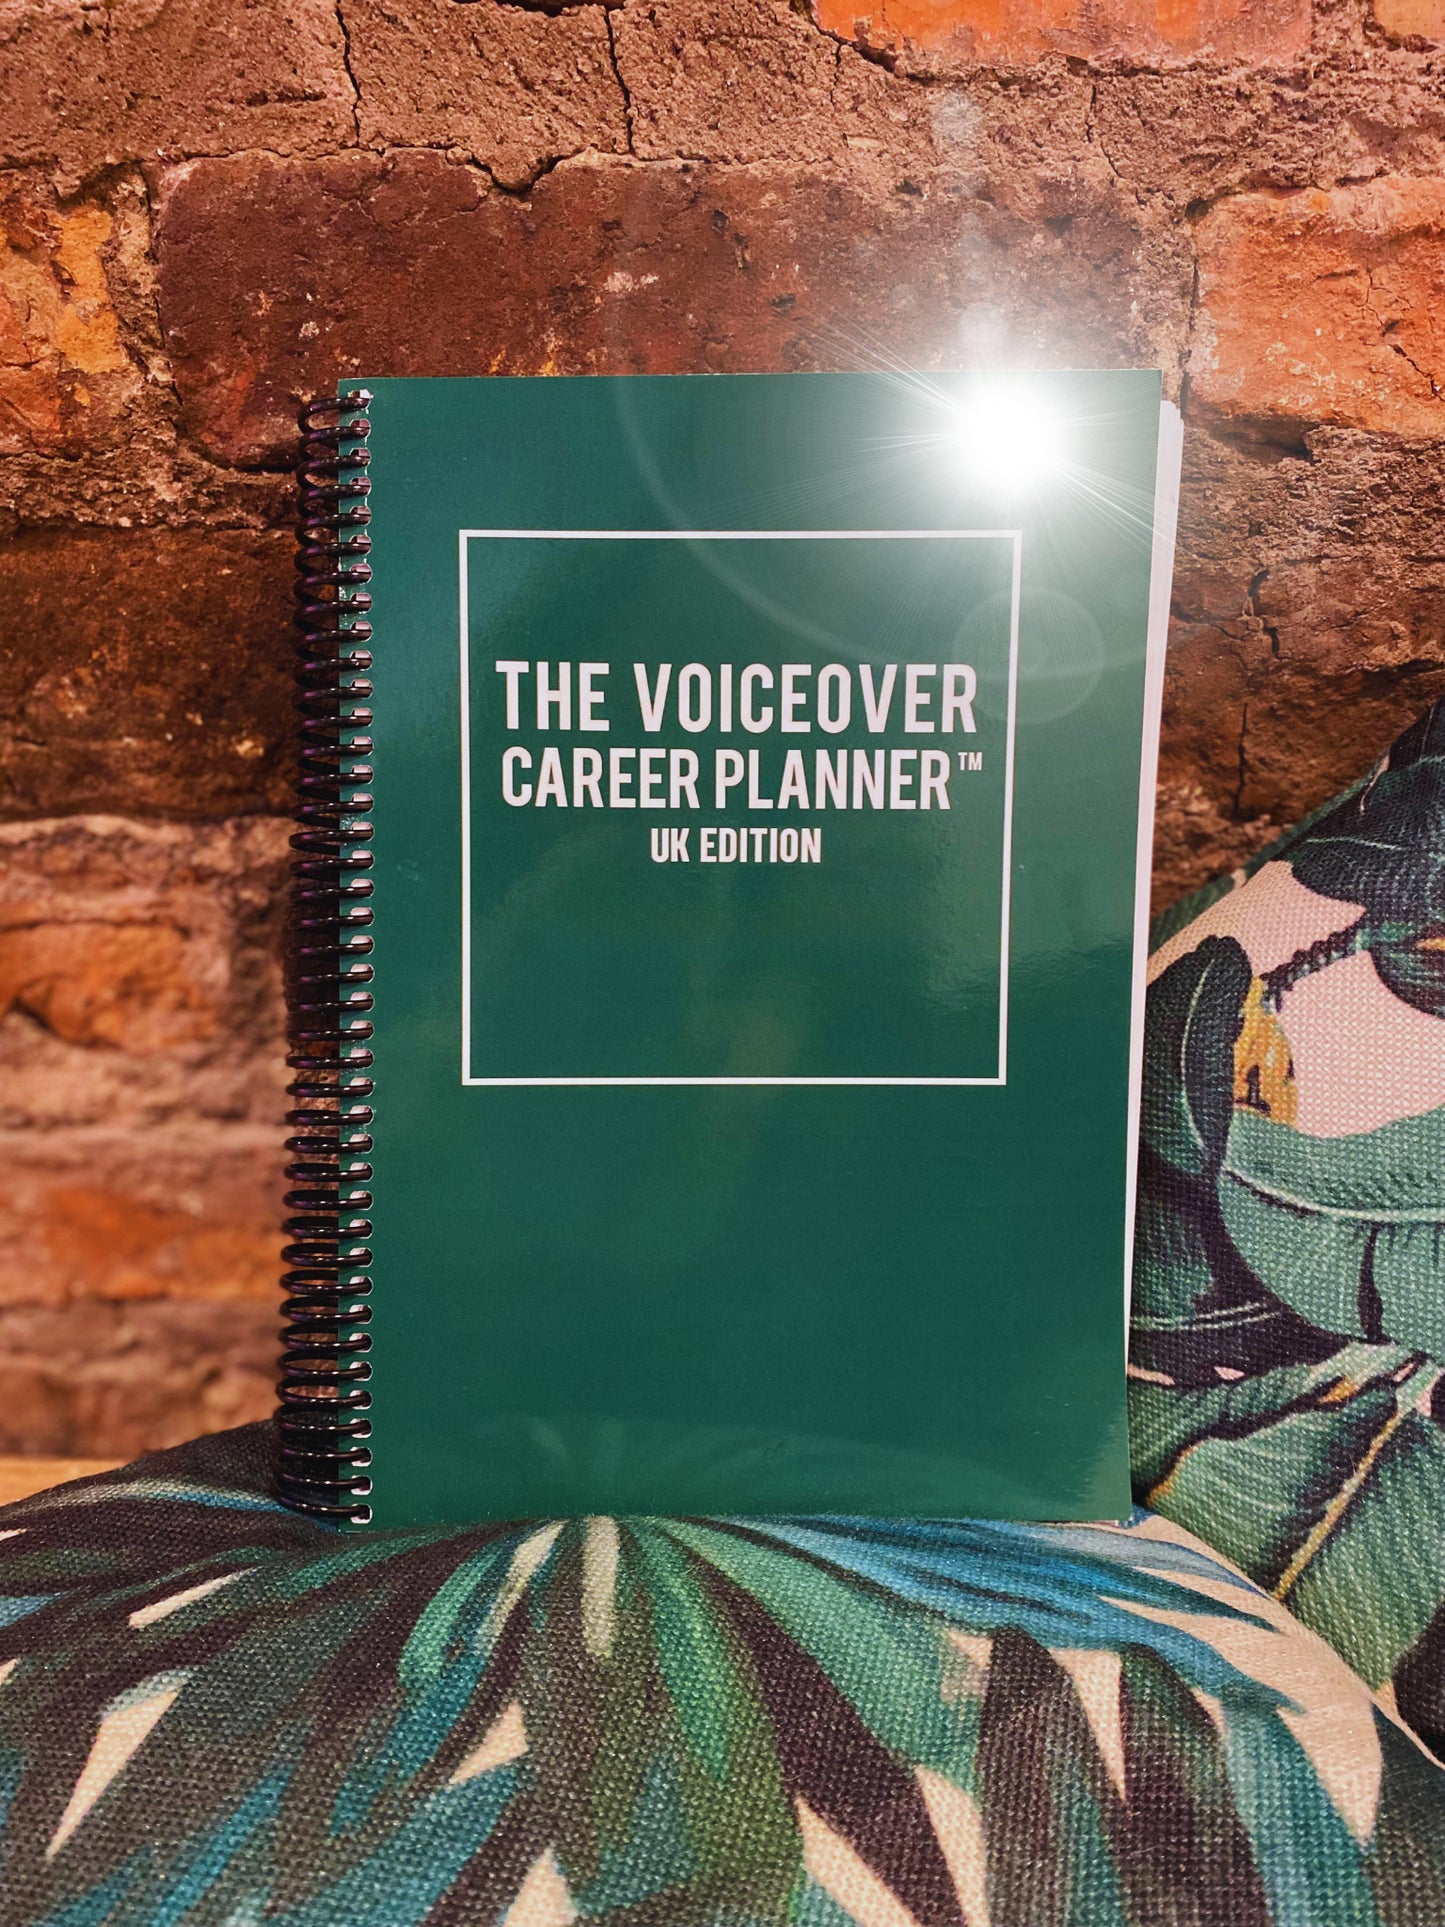 The Voiceover Career Planner - UK Edition